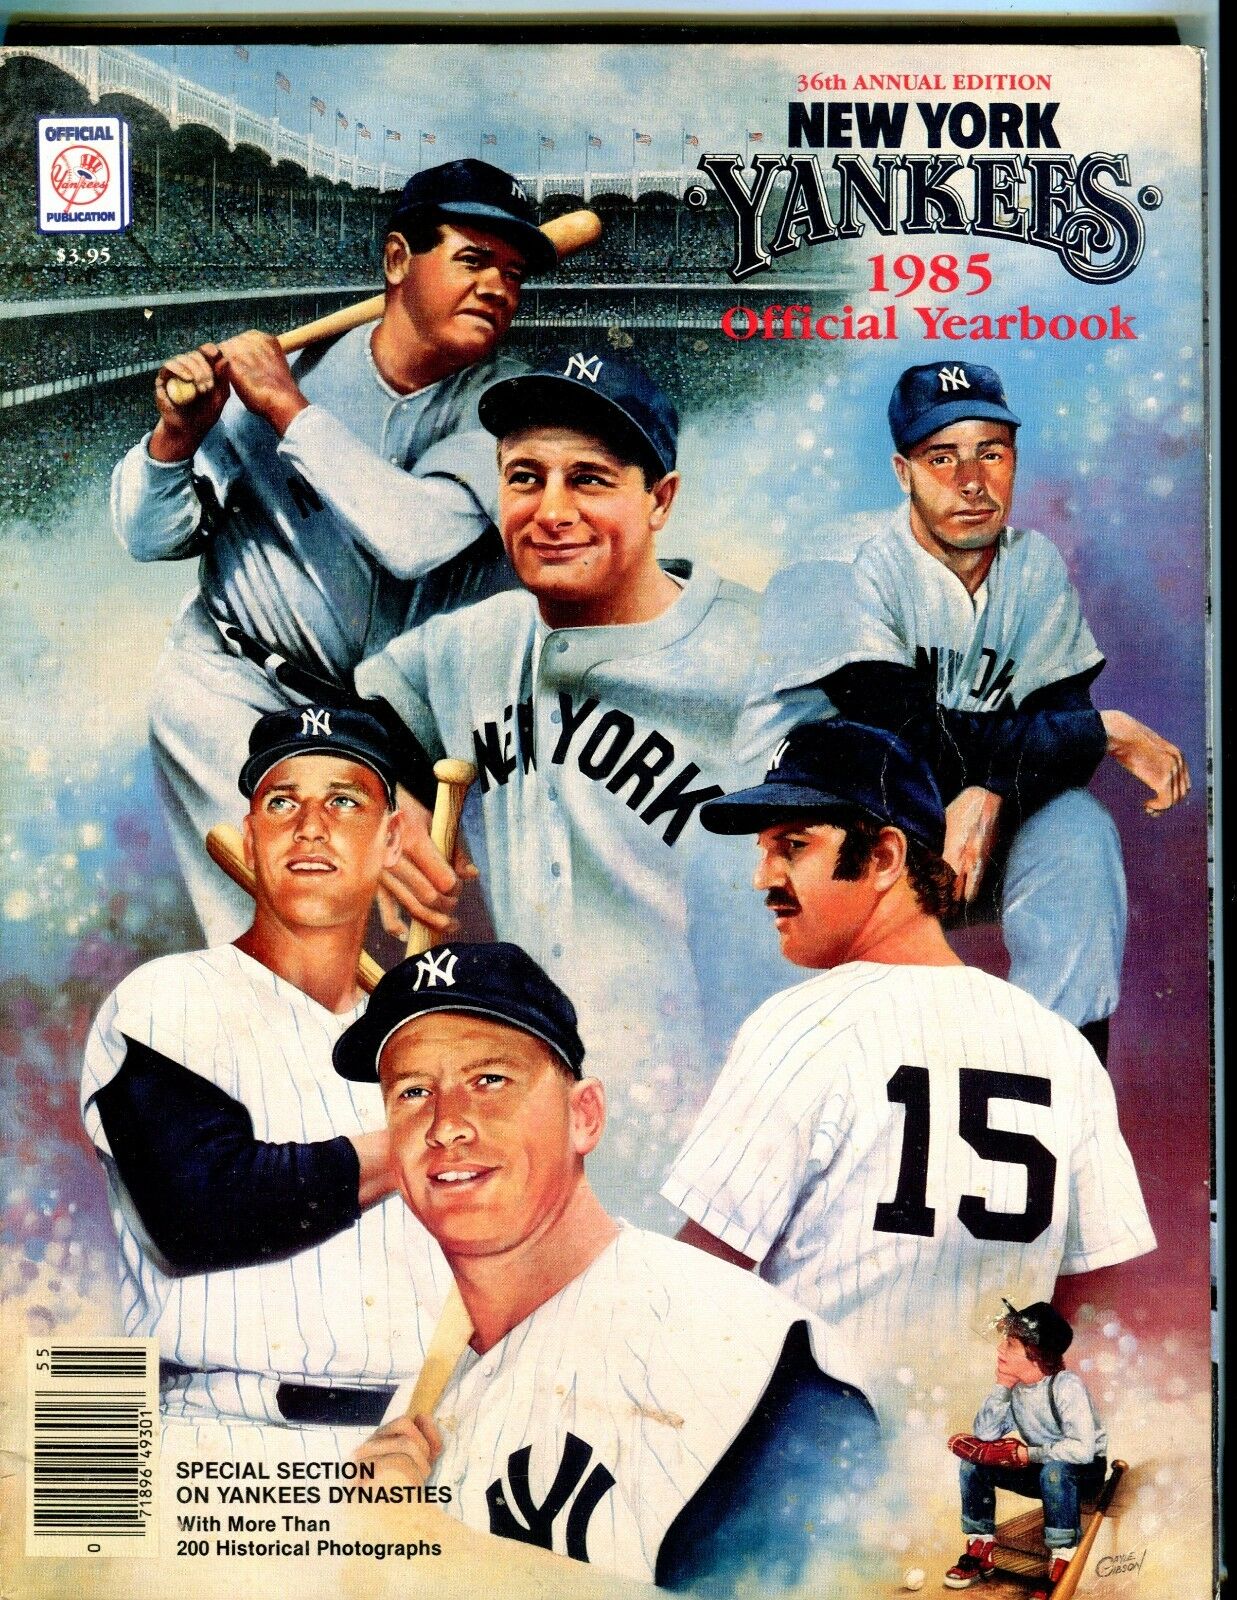 1985 New York Yankees Official Yearbook EX 051517nonjhe